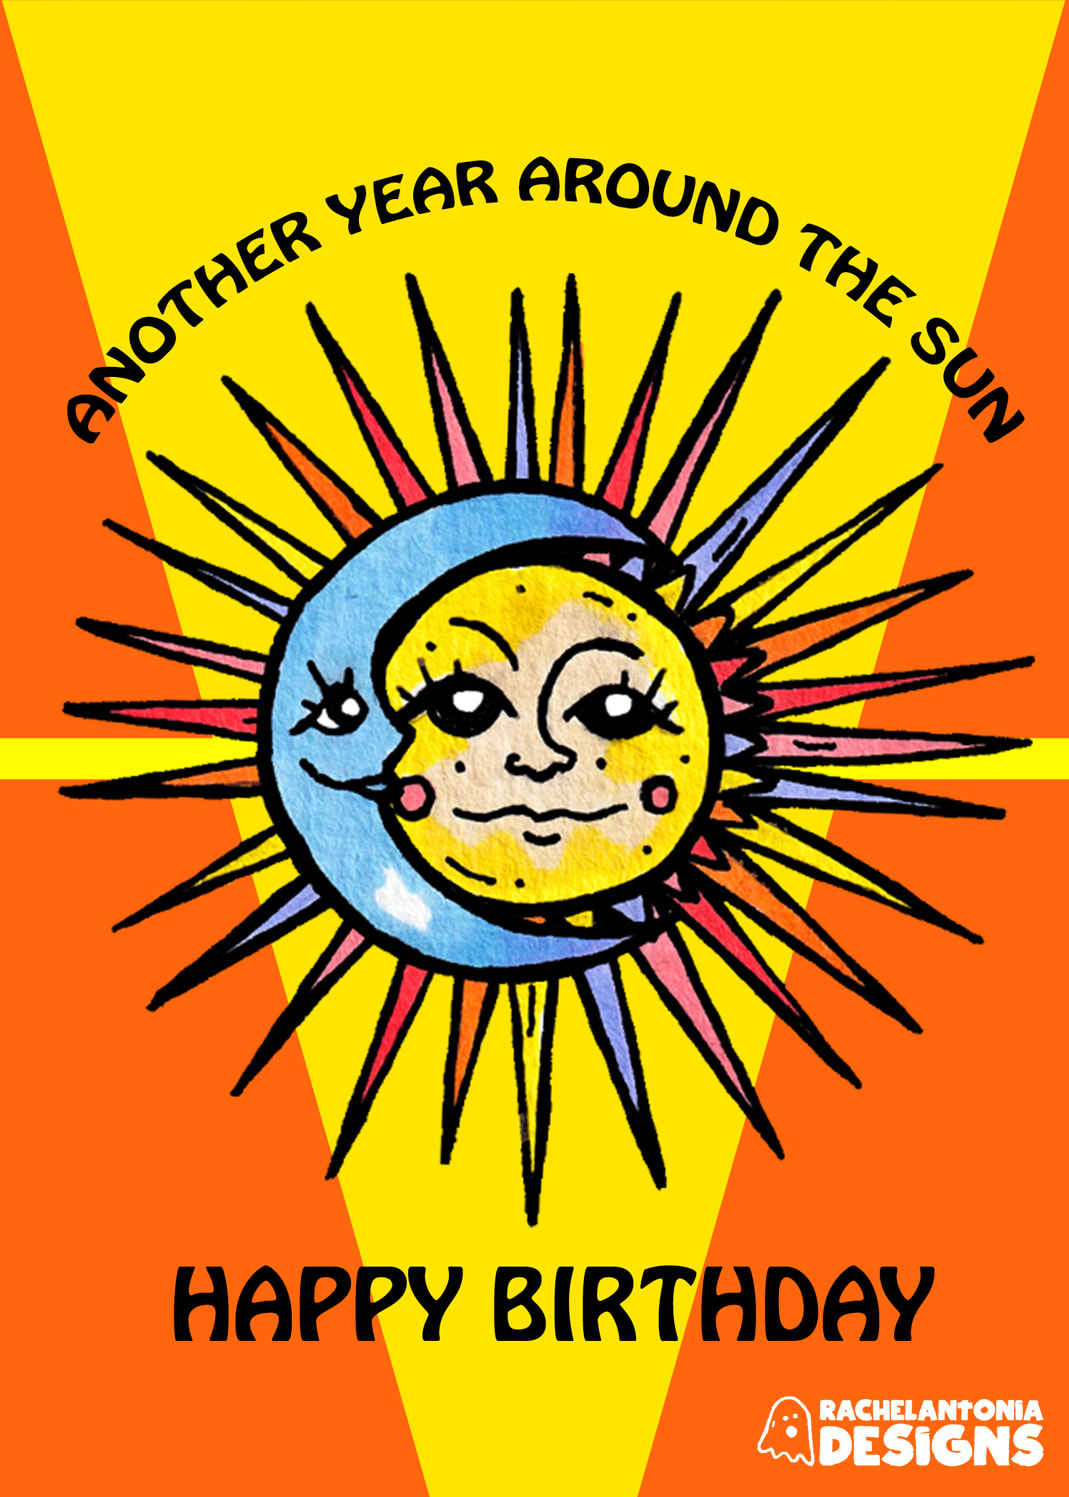 Image of a yellow card with a bright sun and the words Another Year Around the Sun Happy Birthday on it